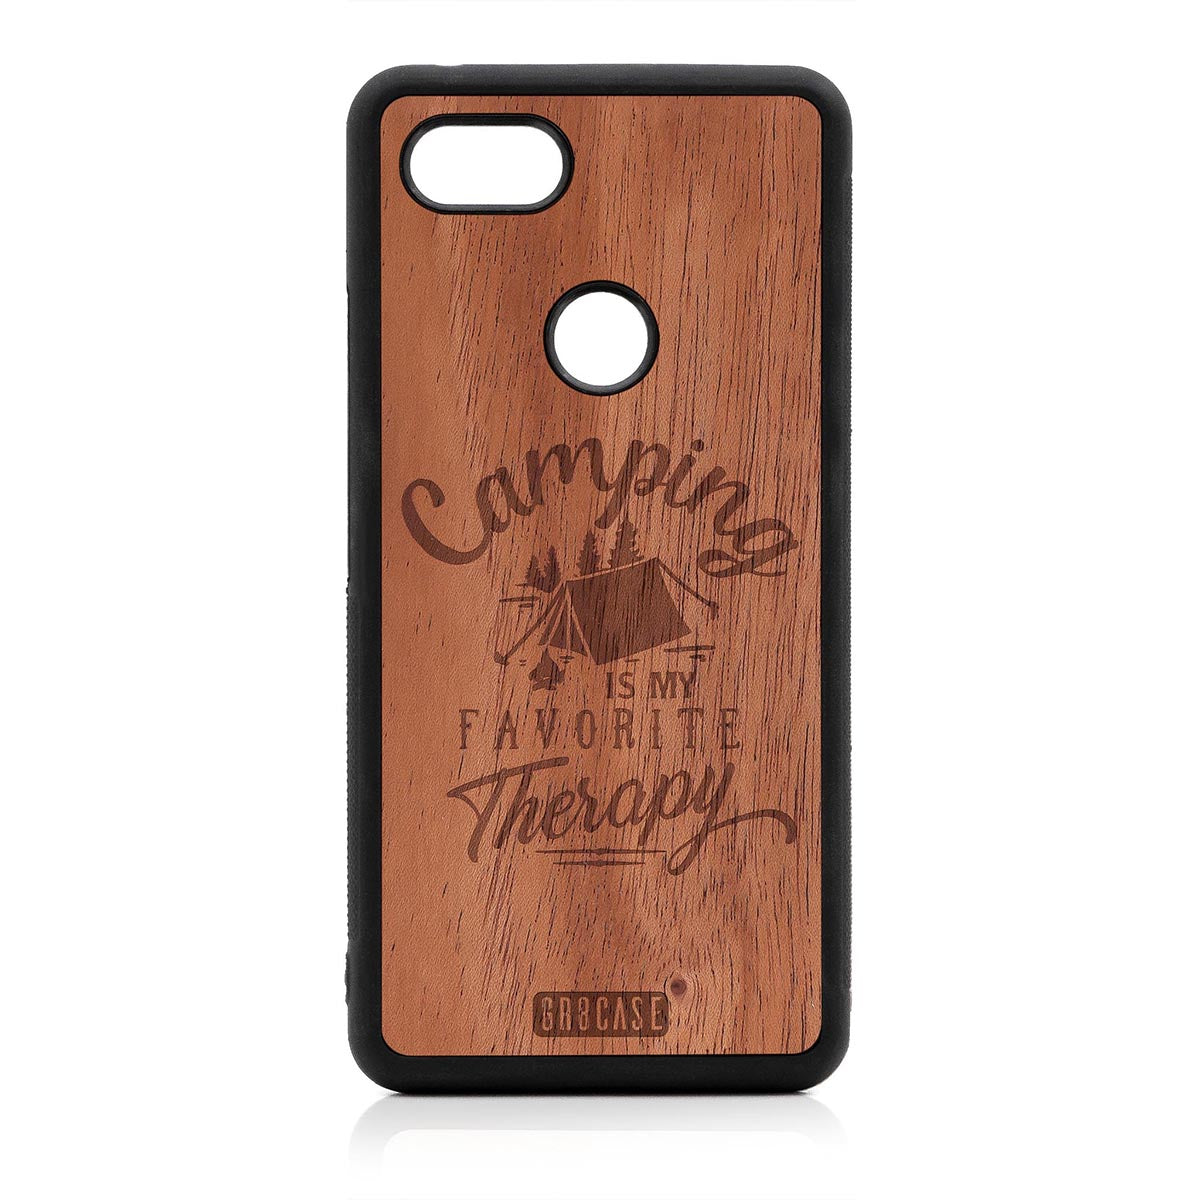 Camping Is My Favorite Therapy Design Wood Case For Google Pixel 3 XL by GR8CASE